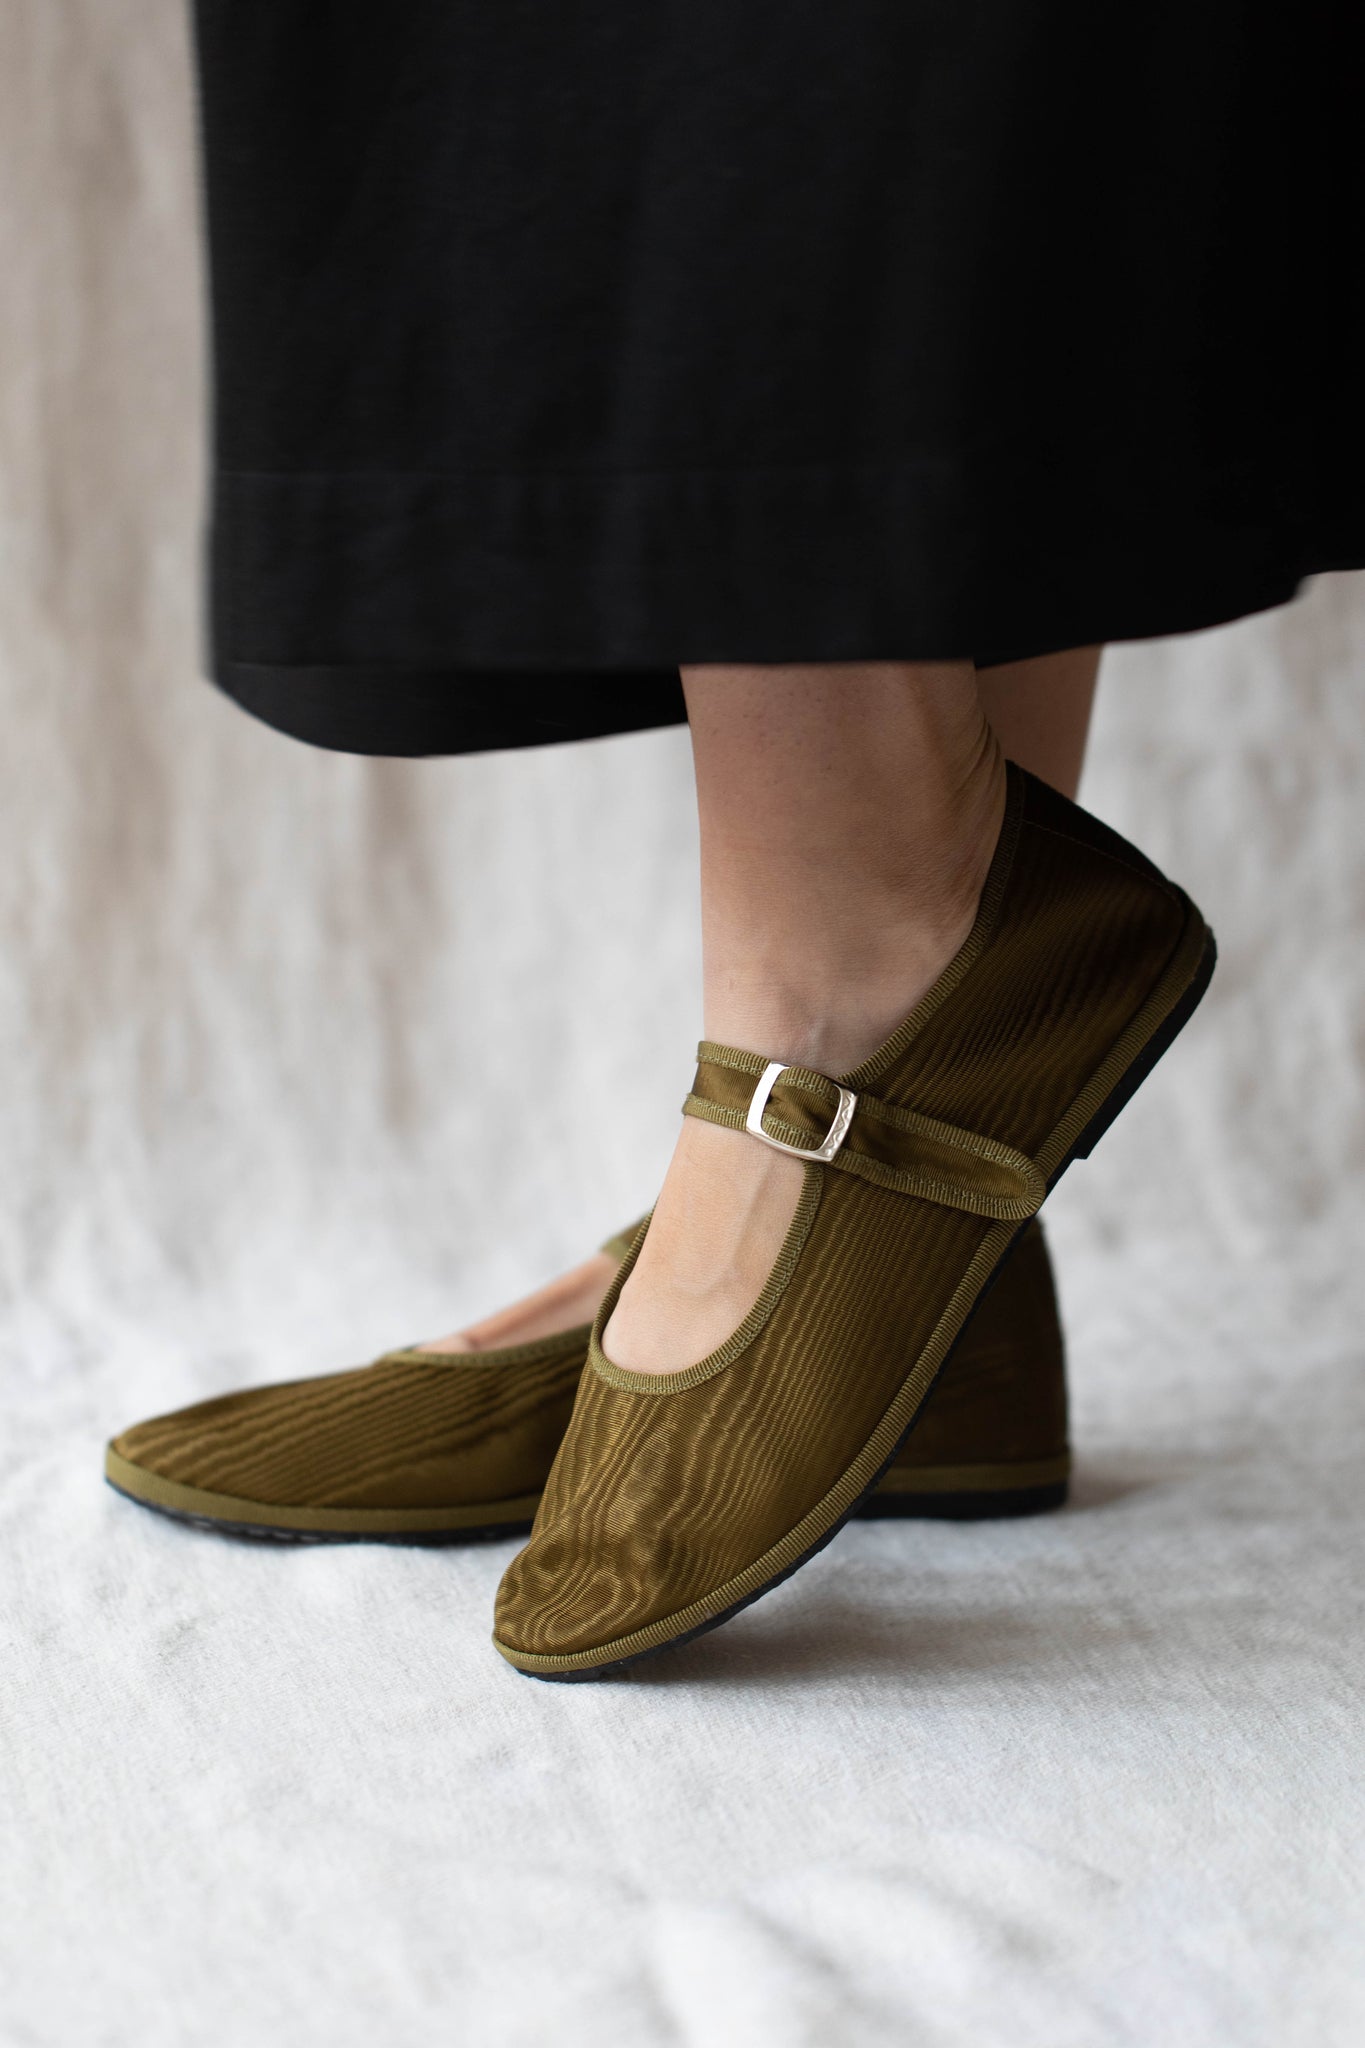 Drogheria Crivellini Silk Mary Janes in Olive